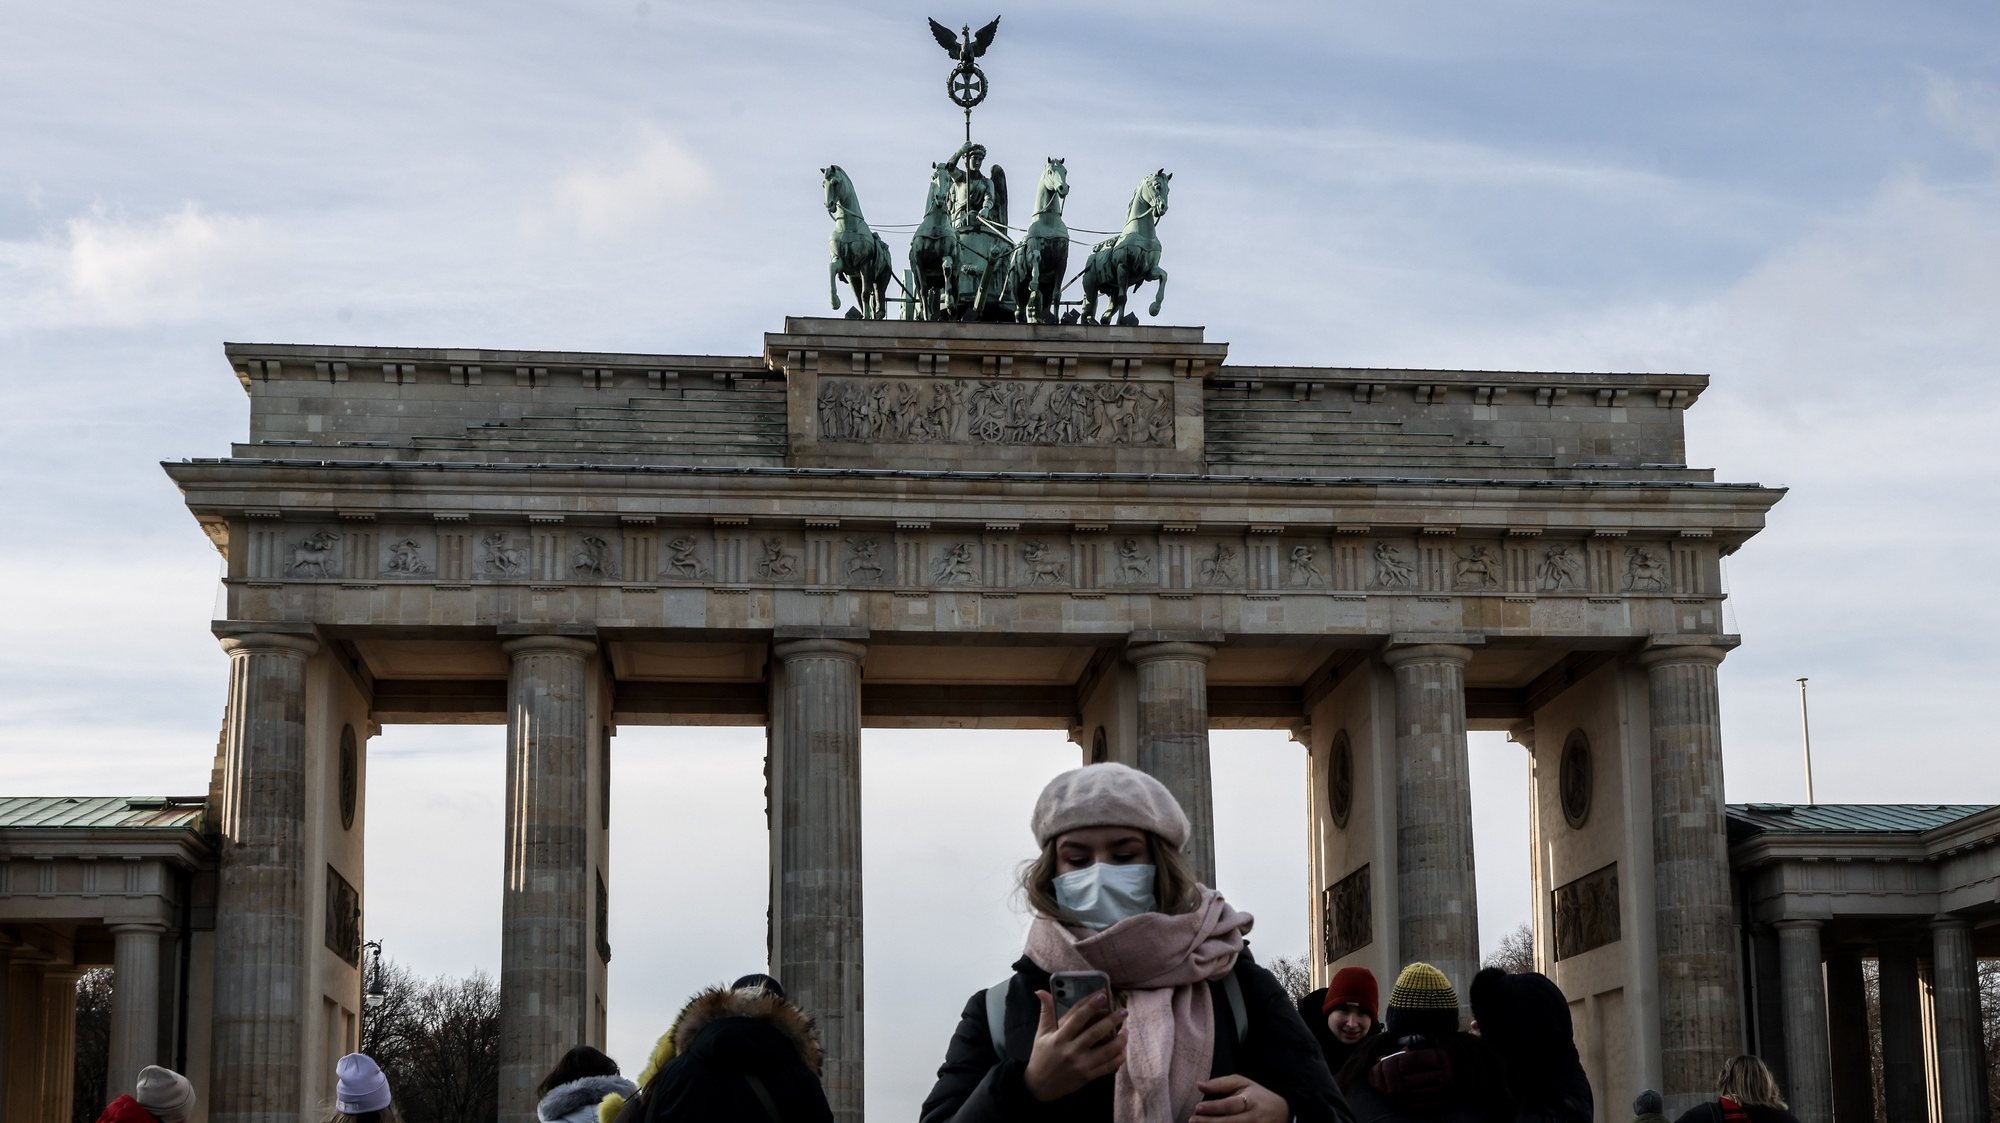 epa09619354 A woman wears a face mask in-front of the Brandenburg Gate in Berlin, Germany, 03 December 2021. Germany is dealing with a rising number of new coronavirus COVID-19 infections as countries throughout Europe have been increasing restrictions amid fear of the new Omicron variant of concern.  EPA/FILIP SINGER